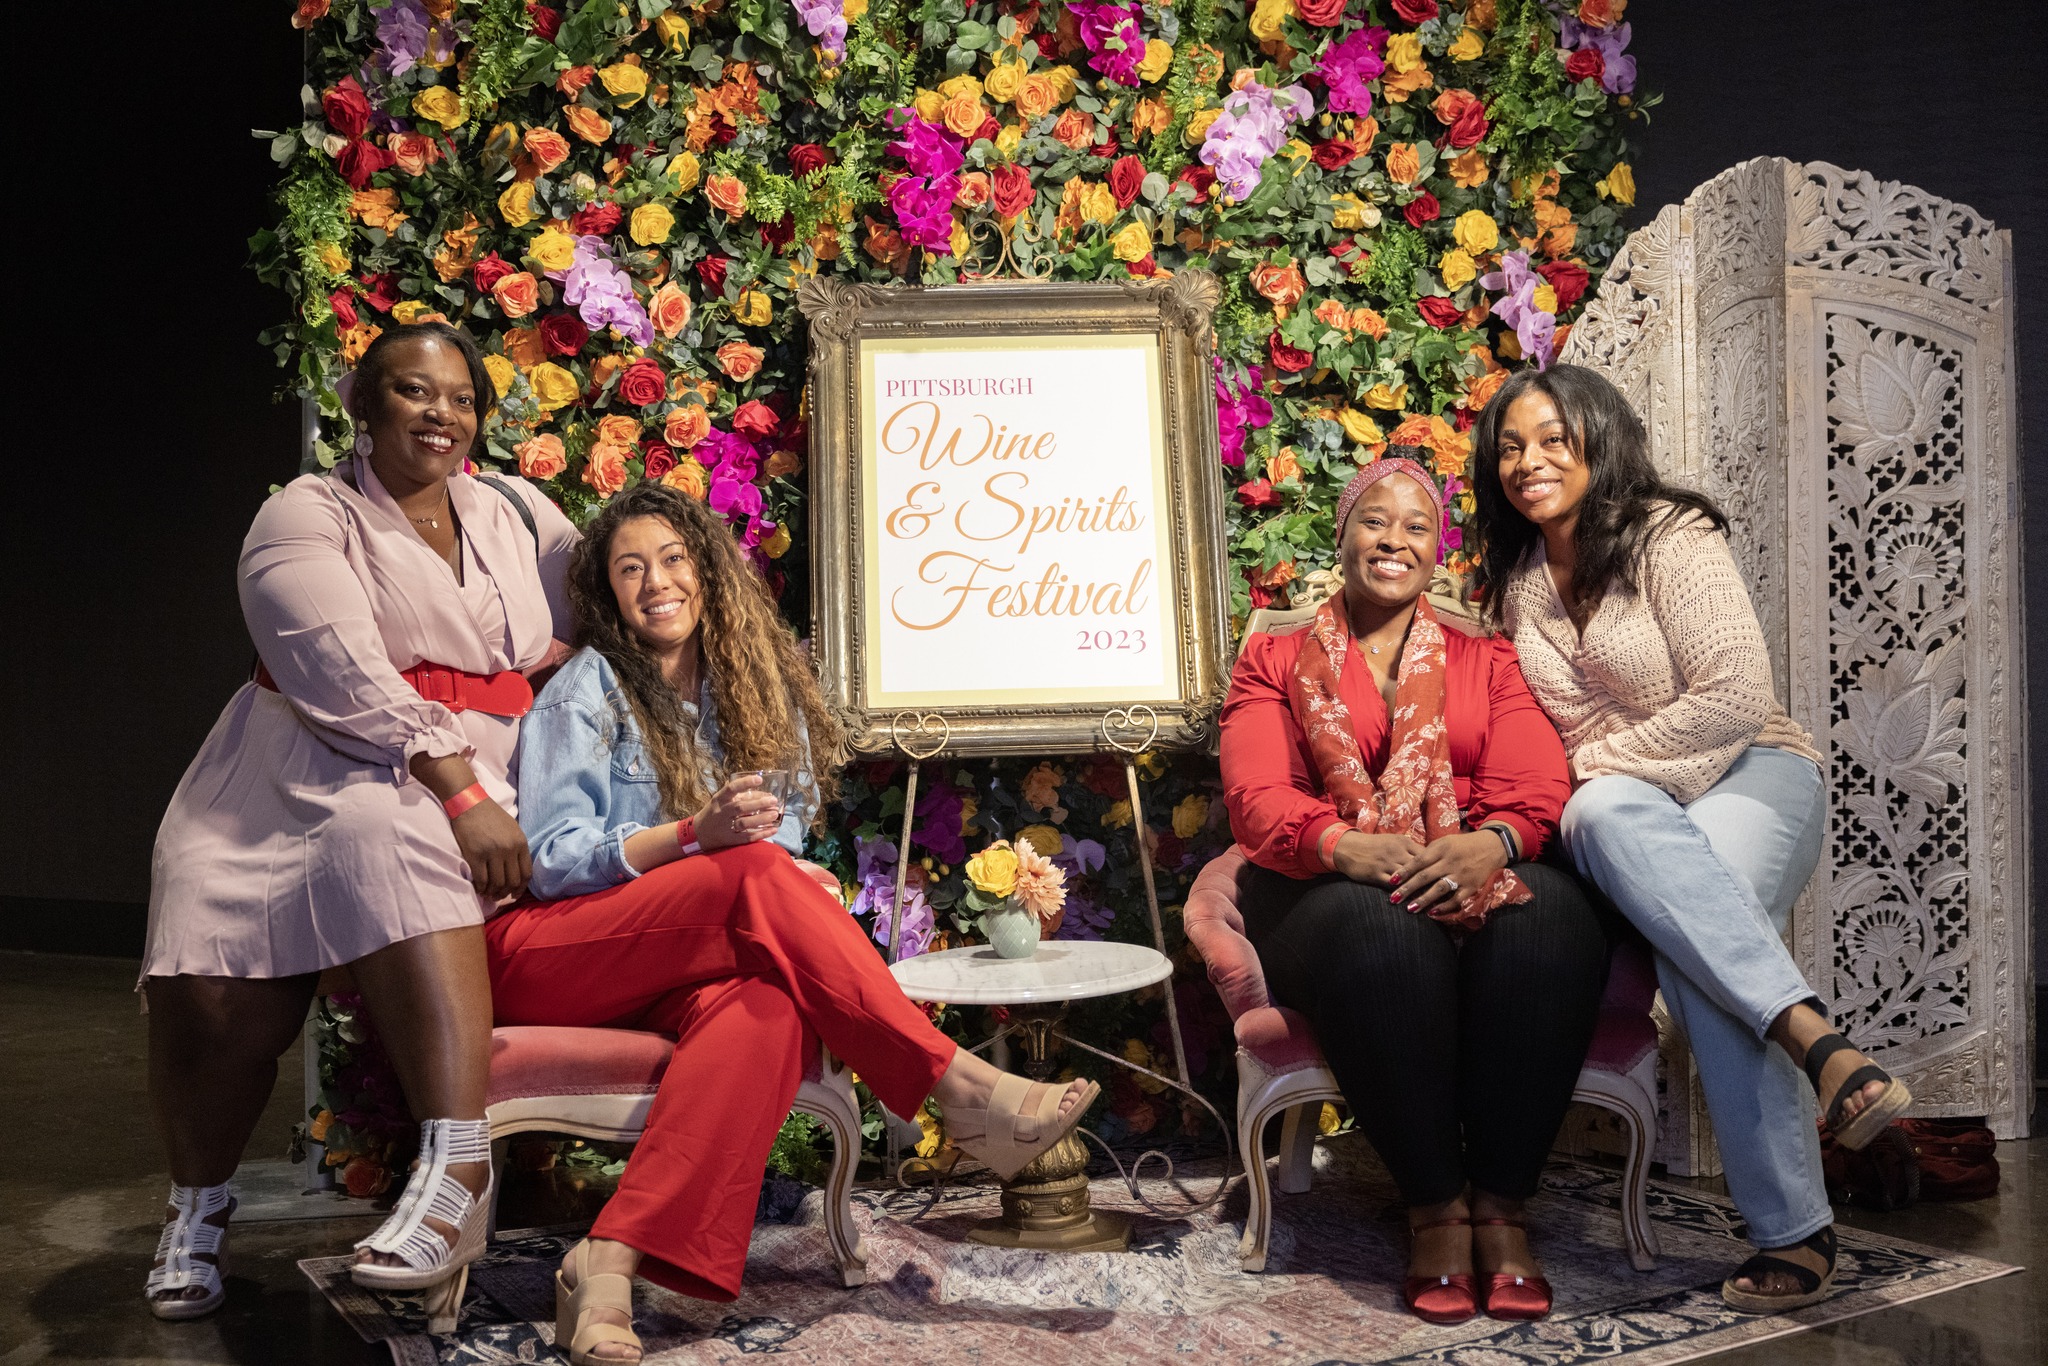 A photo of four women posing with a beautiful backdrop of flowers behind them. The sign in front of the backdrop says Wine & Spirit Festival 2023.